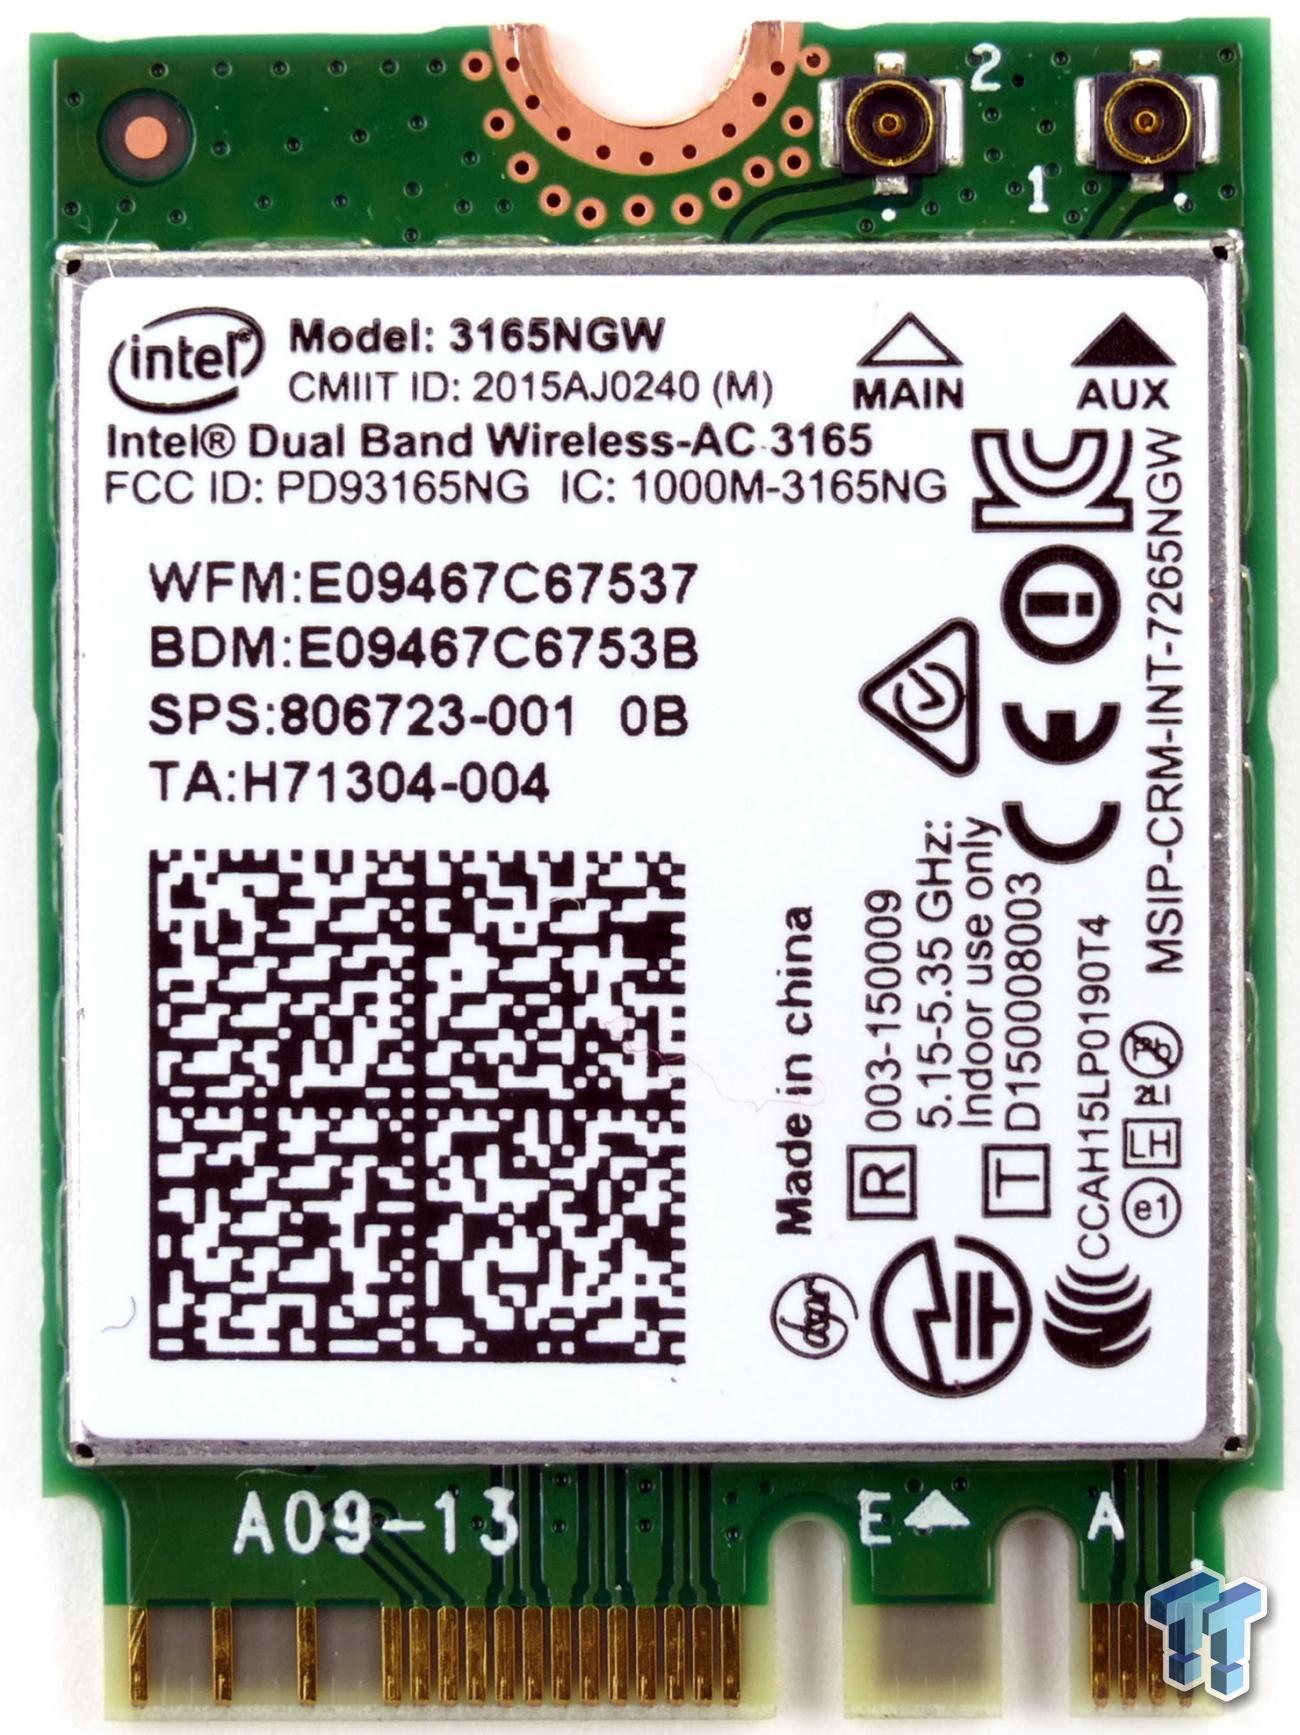 intel dual band wireless ac 3165 review